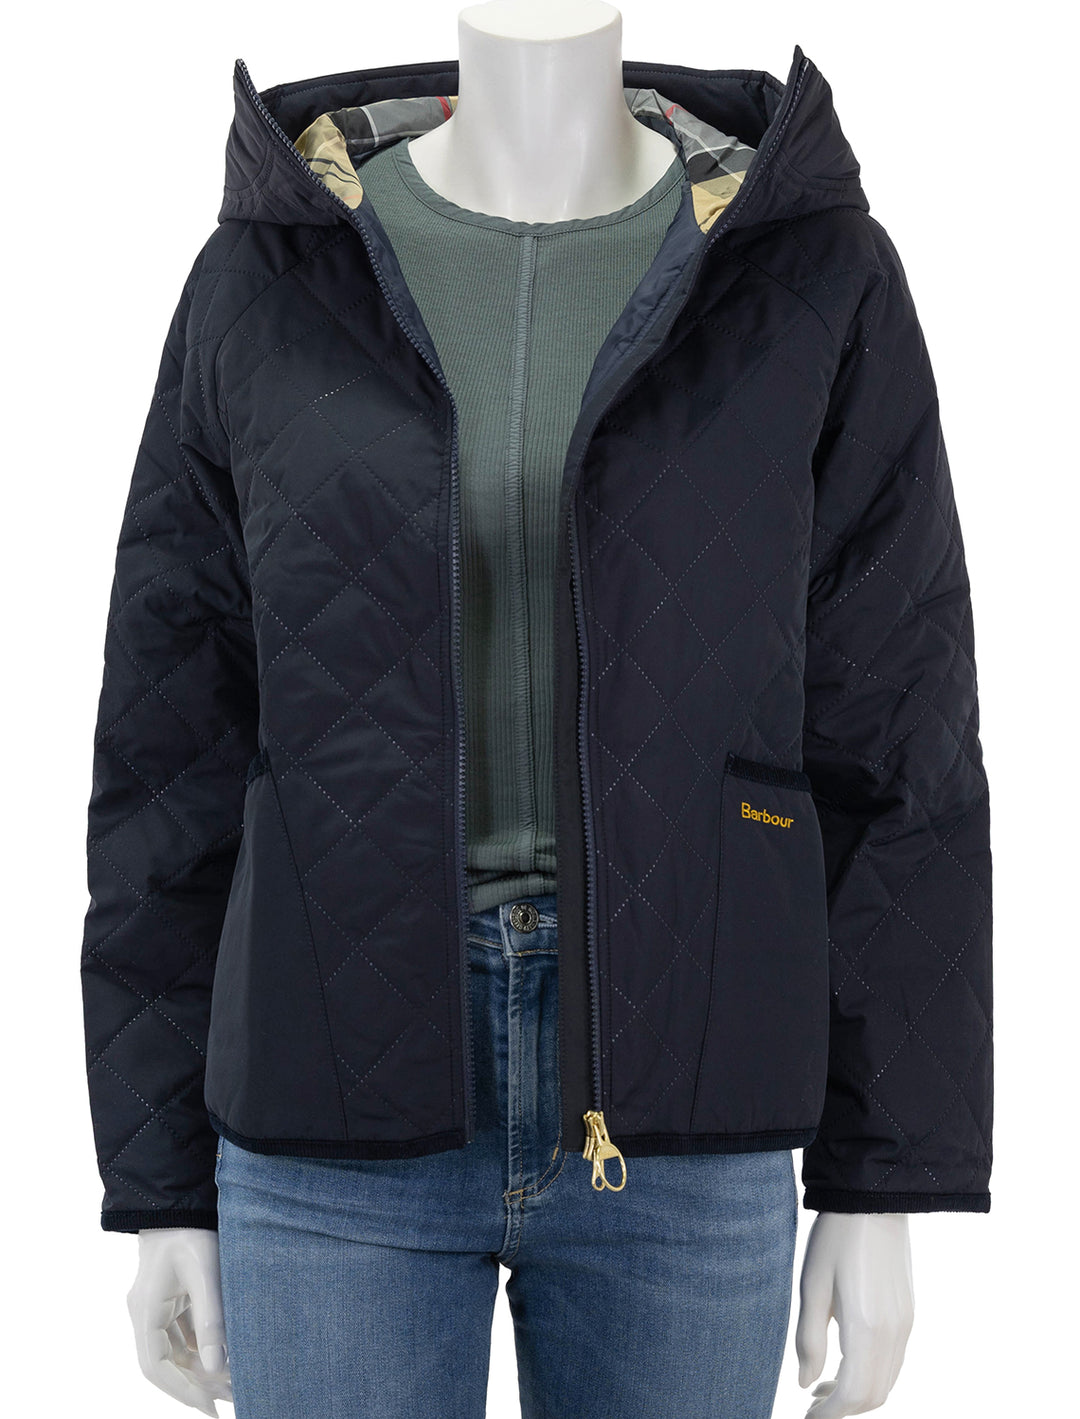 Front view of Barbour's glamis quilt jacket in dark navy, unzipped.